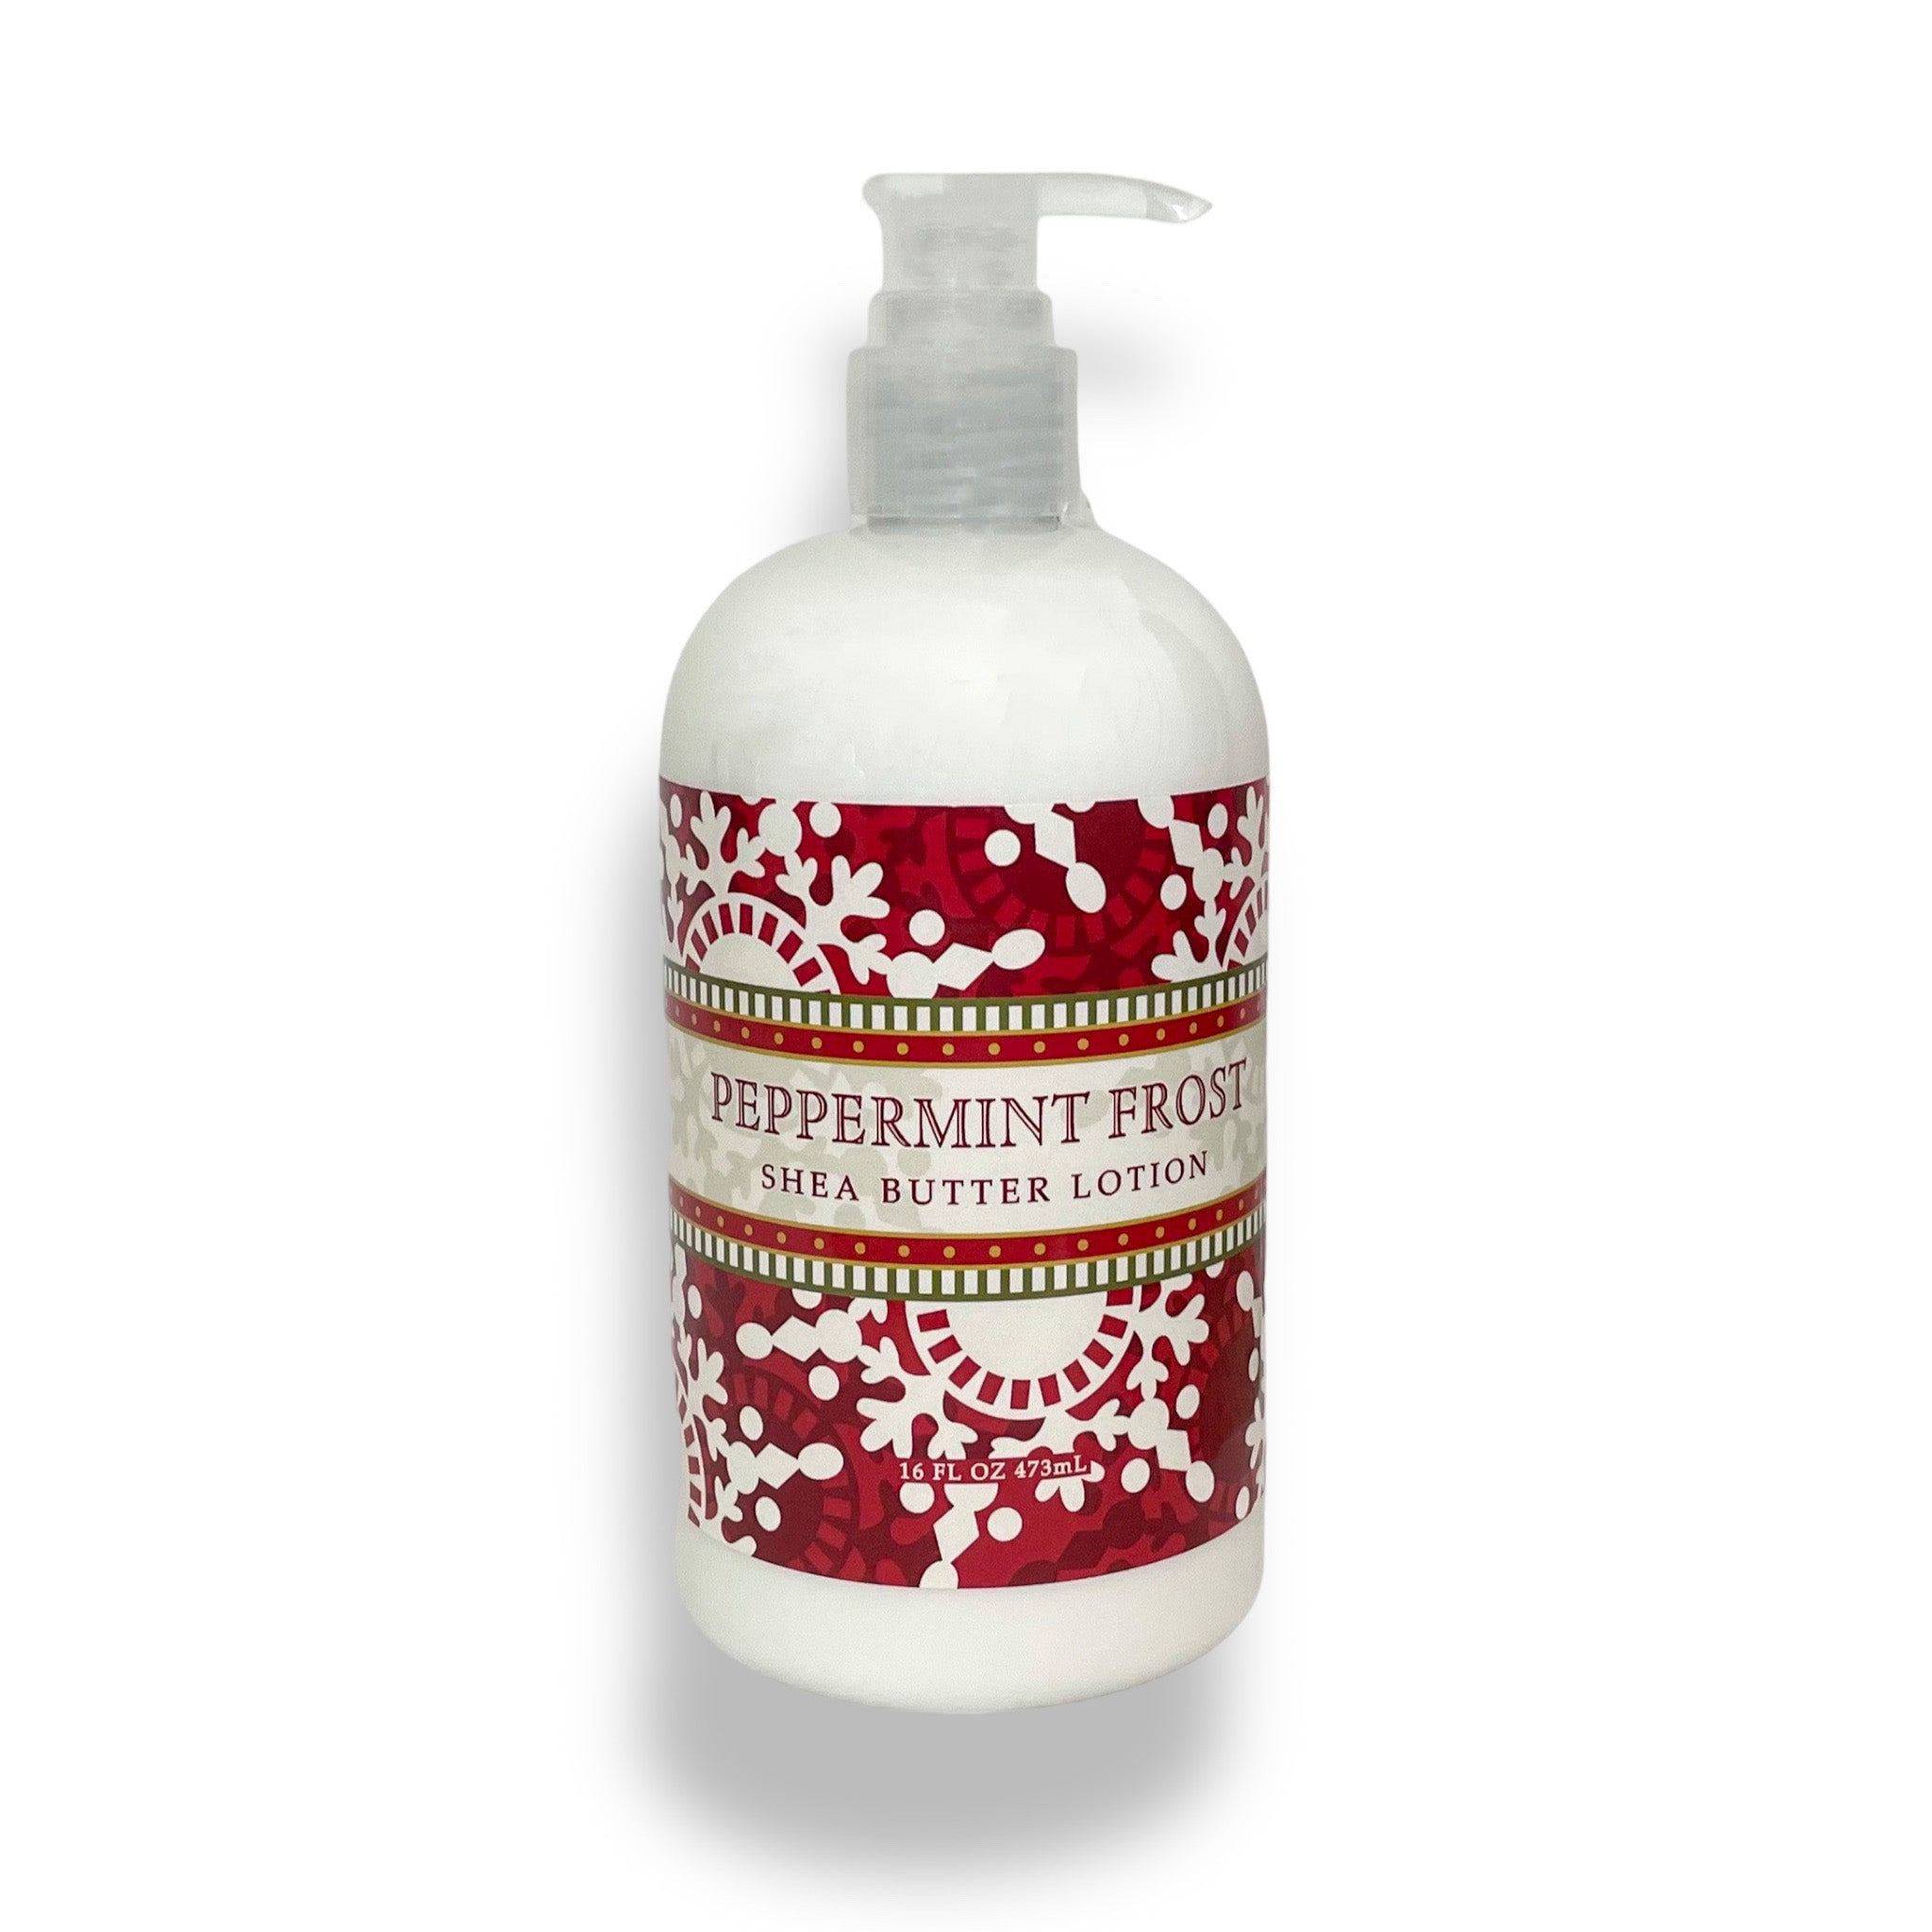 Greenwich Bay Trading Company Peppermint Frost Collection Lotion